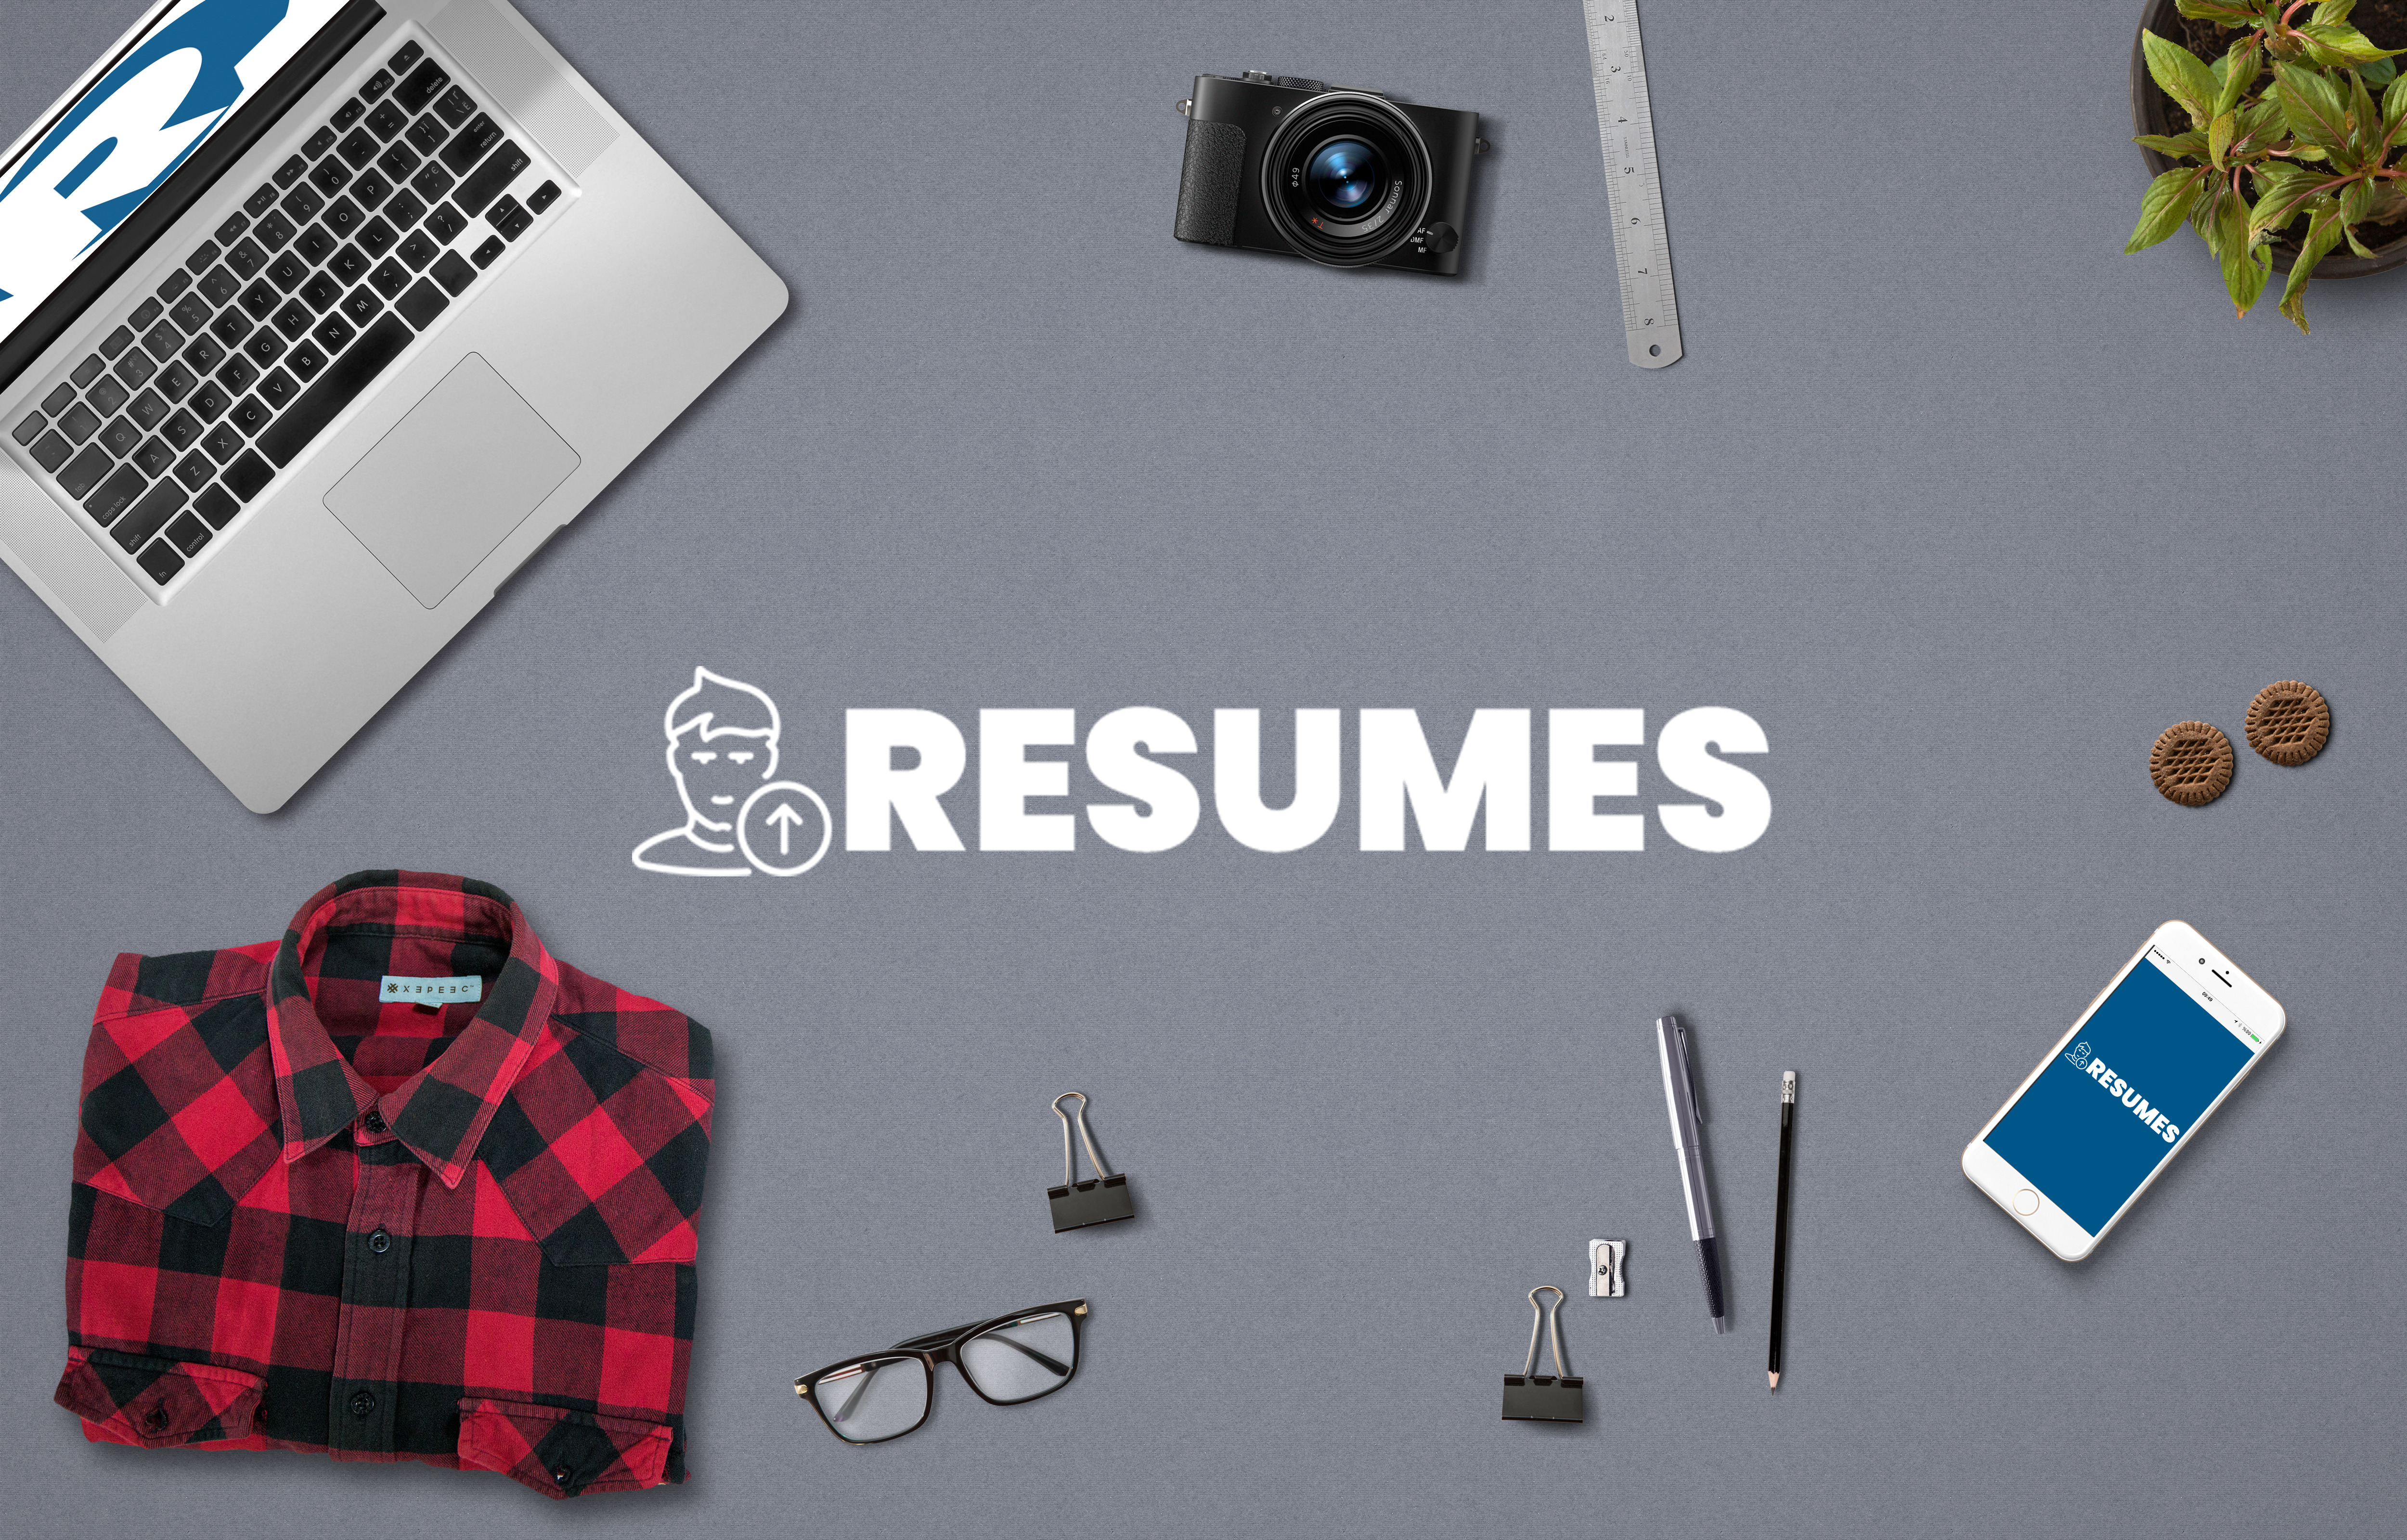 Resumes.tn : Choose the Right Resume for Your Work Experience